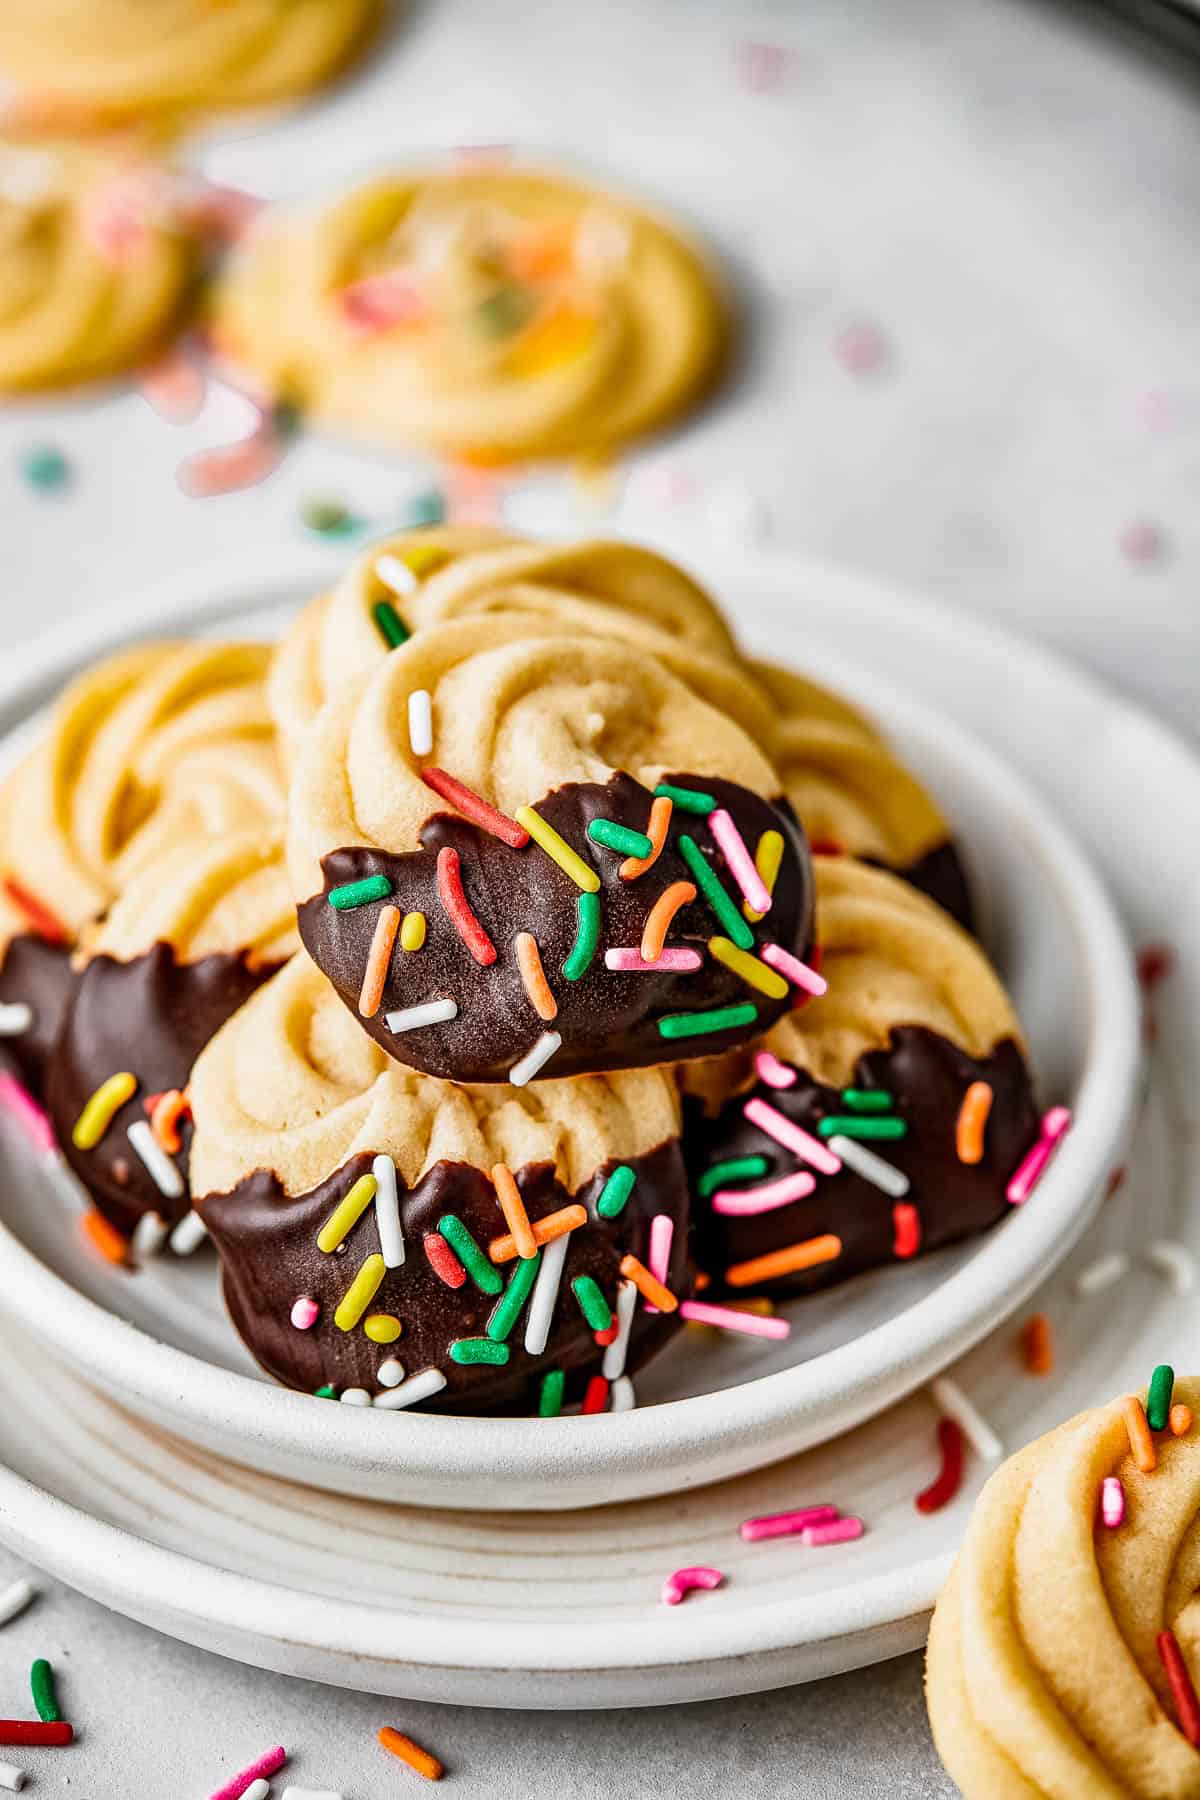 Chocolate iced butter cookies with multicolor sprinkles on a white plate.